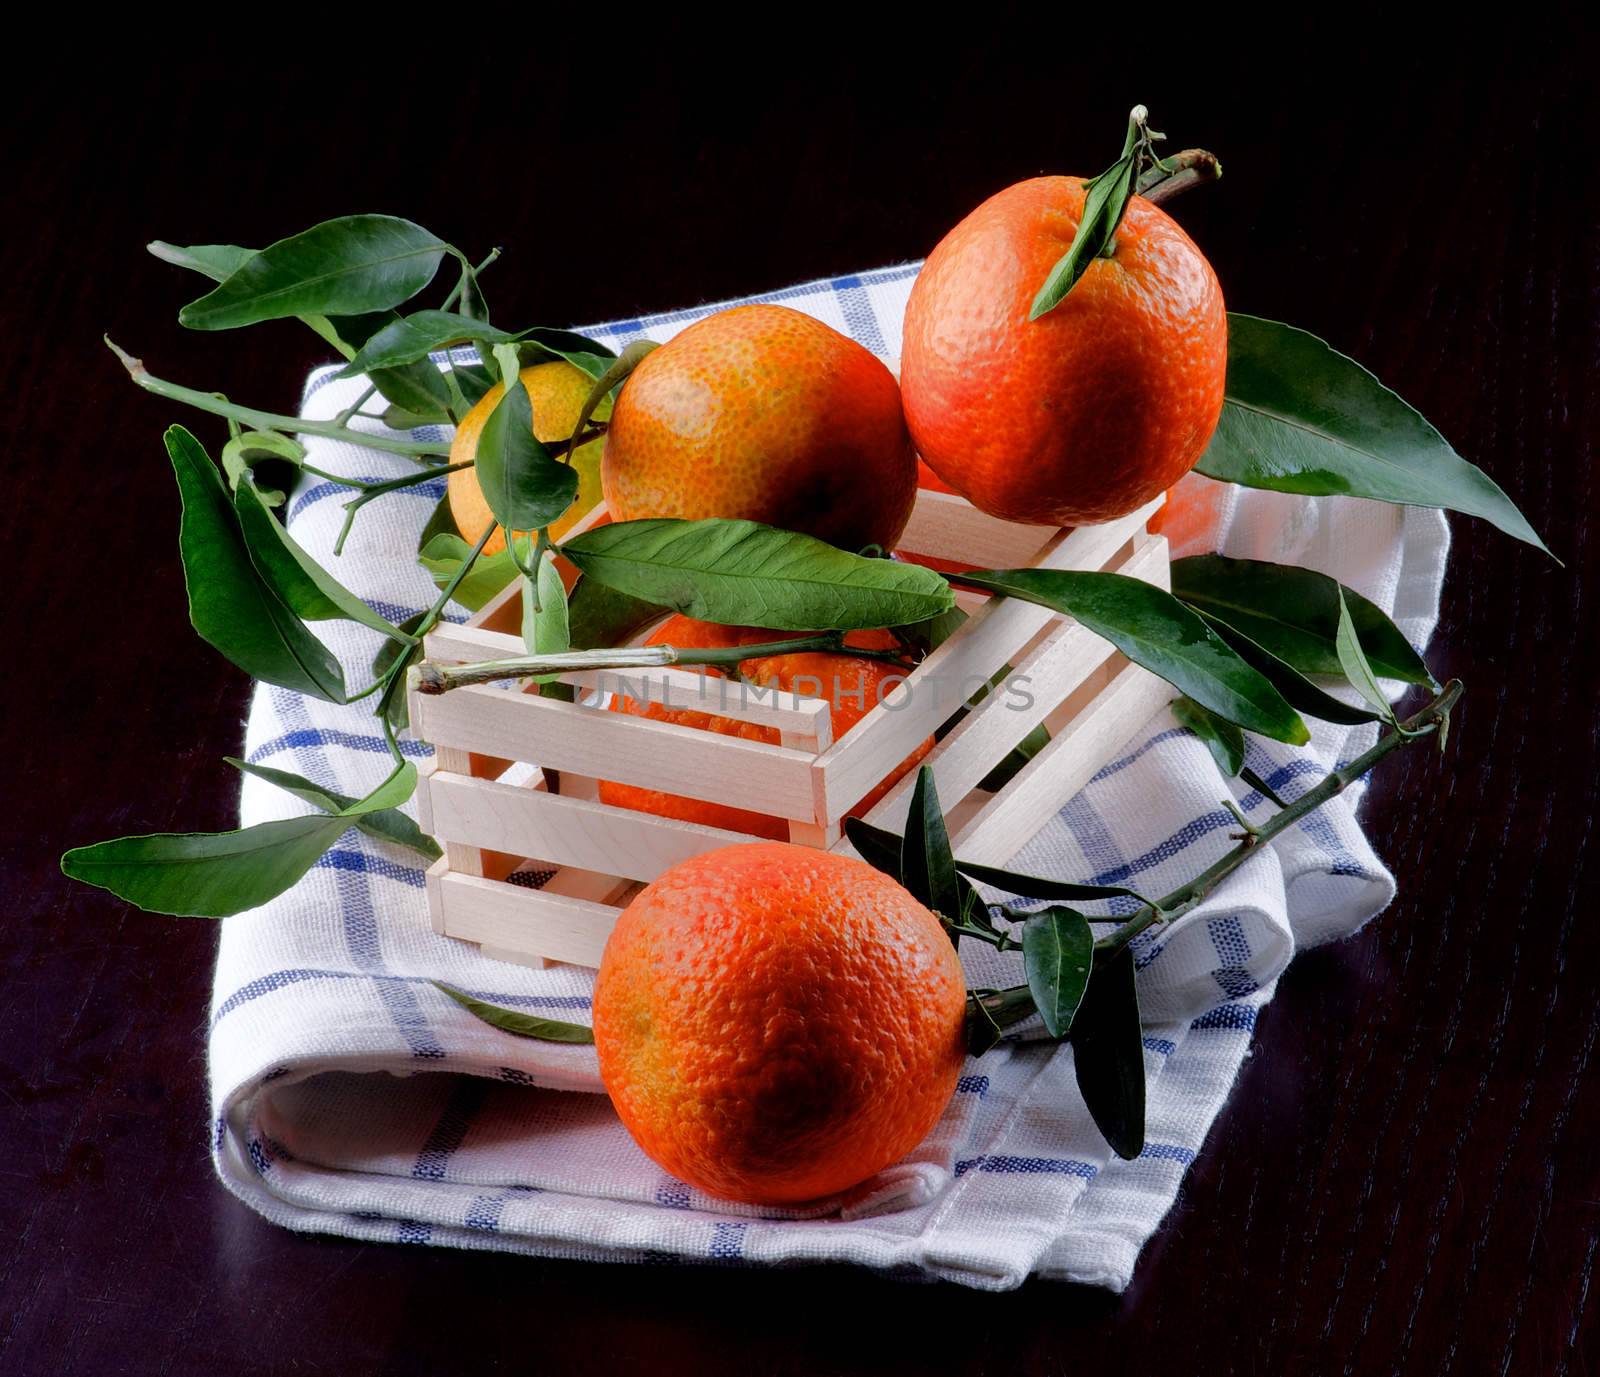 Arrangement of Ripe Tangerines with Leafs in Wooden Box on Napkin closeup on Dark Wooden background